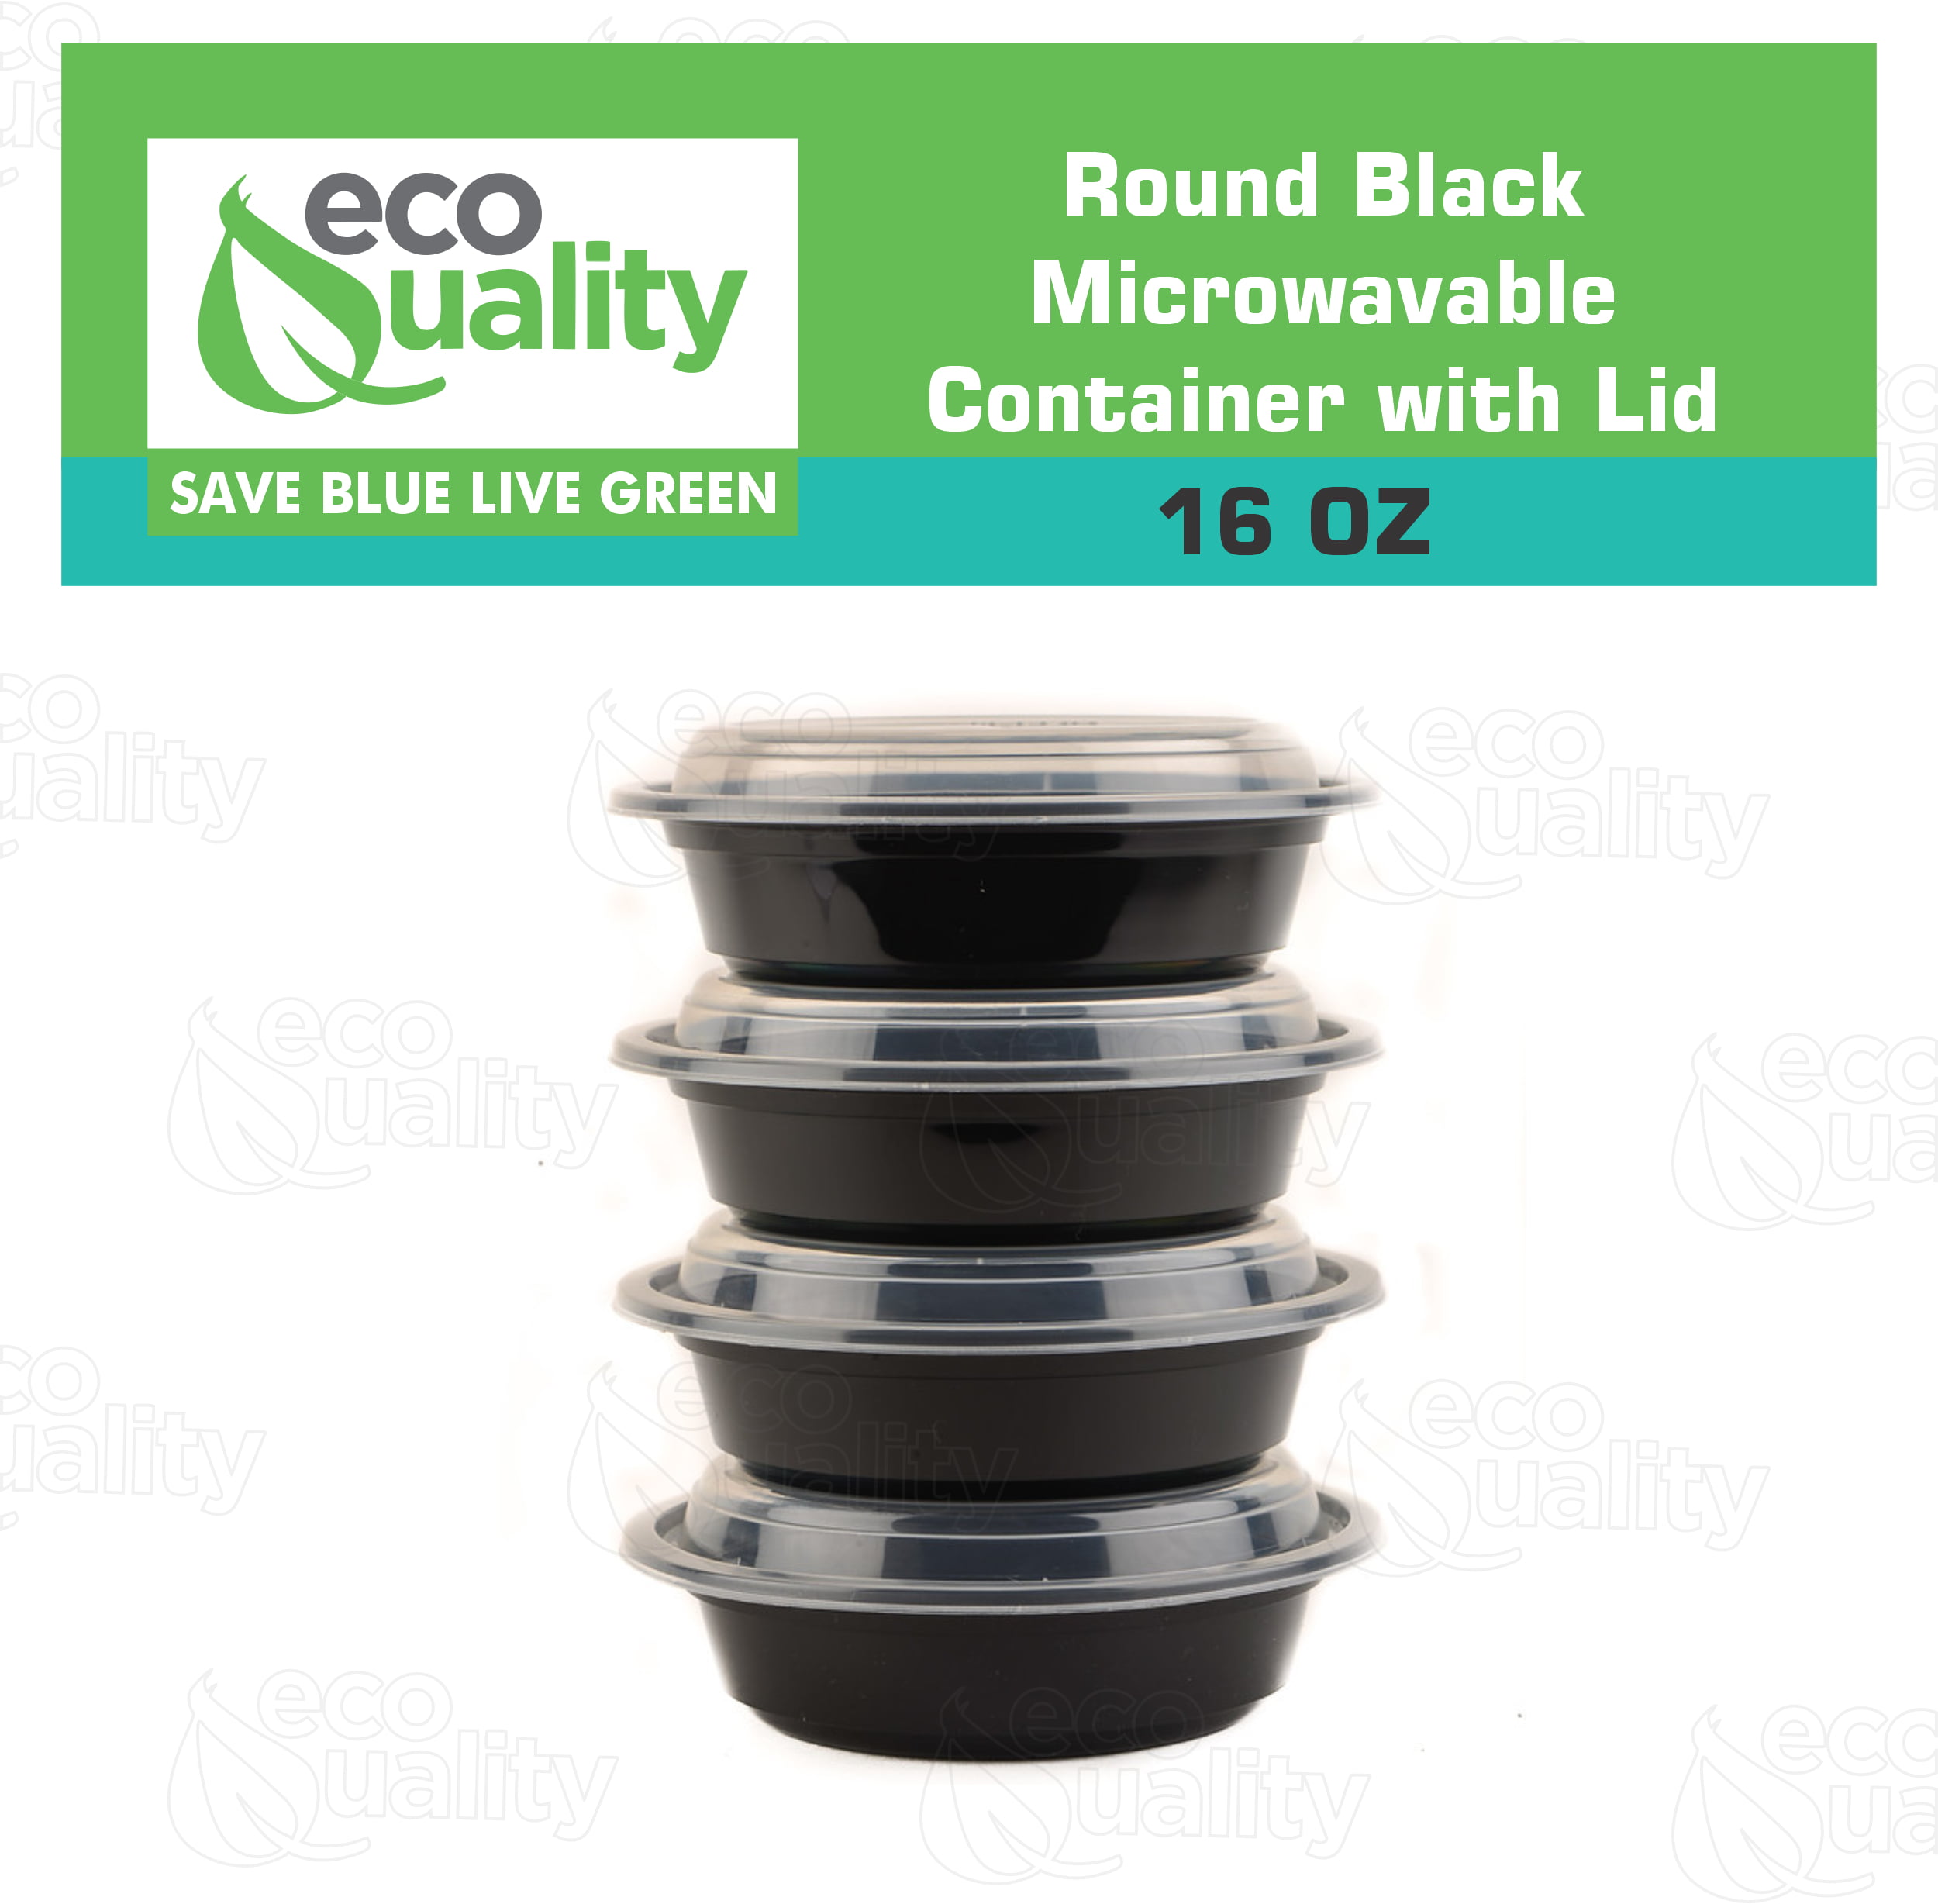 50 Count] 16 oz Black Plastic Meal Prep Containers with Lids - Round Food  Storage Container Microwave Safe - BPA-Free, Stackable, Reusable,  Dishwasher, Freezer Safe, Disposable 